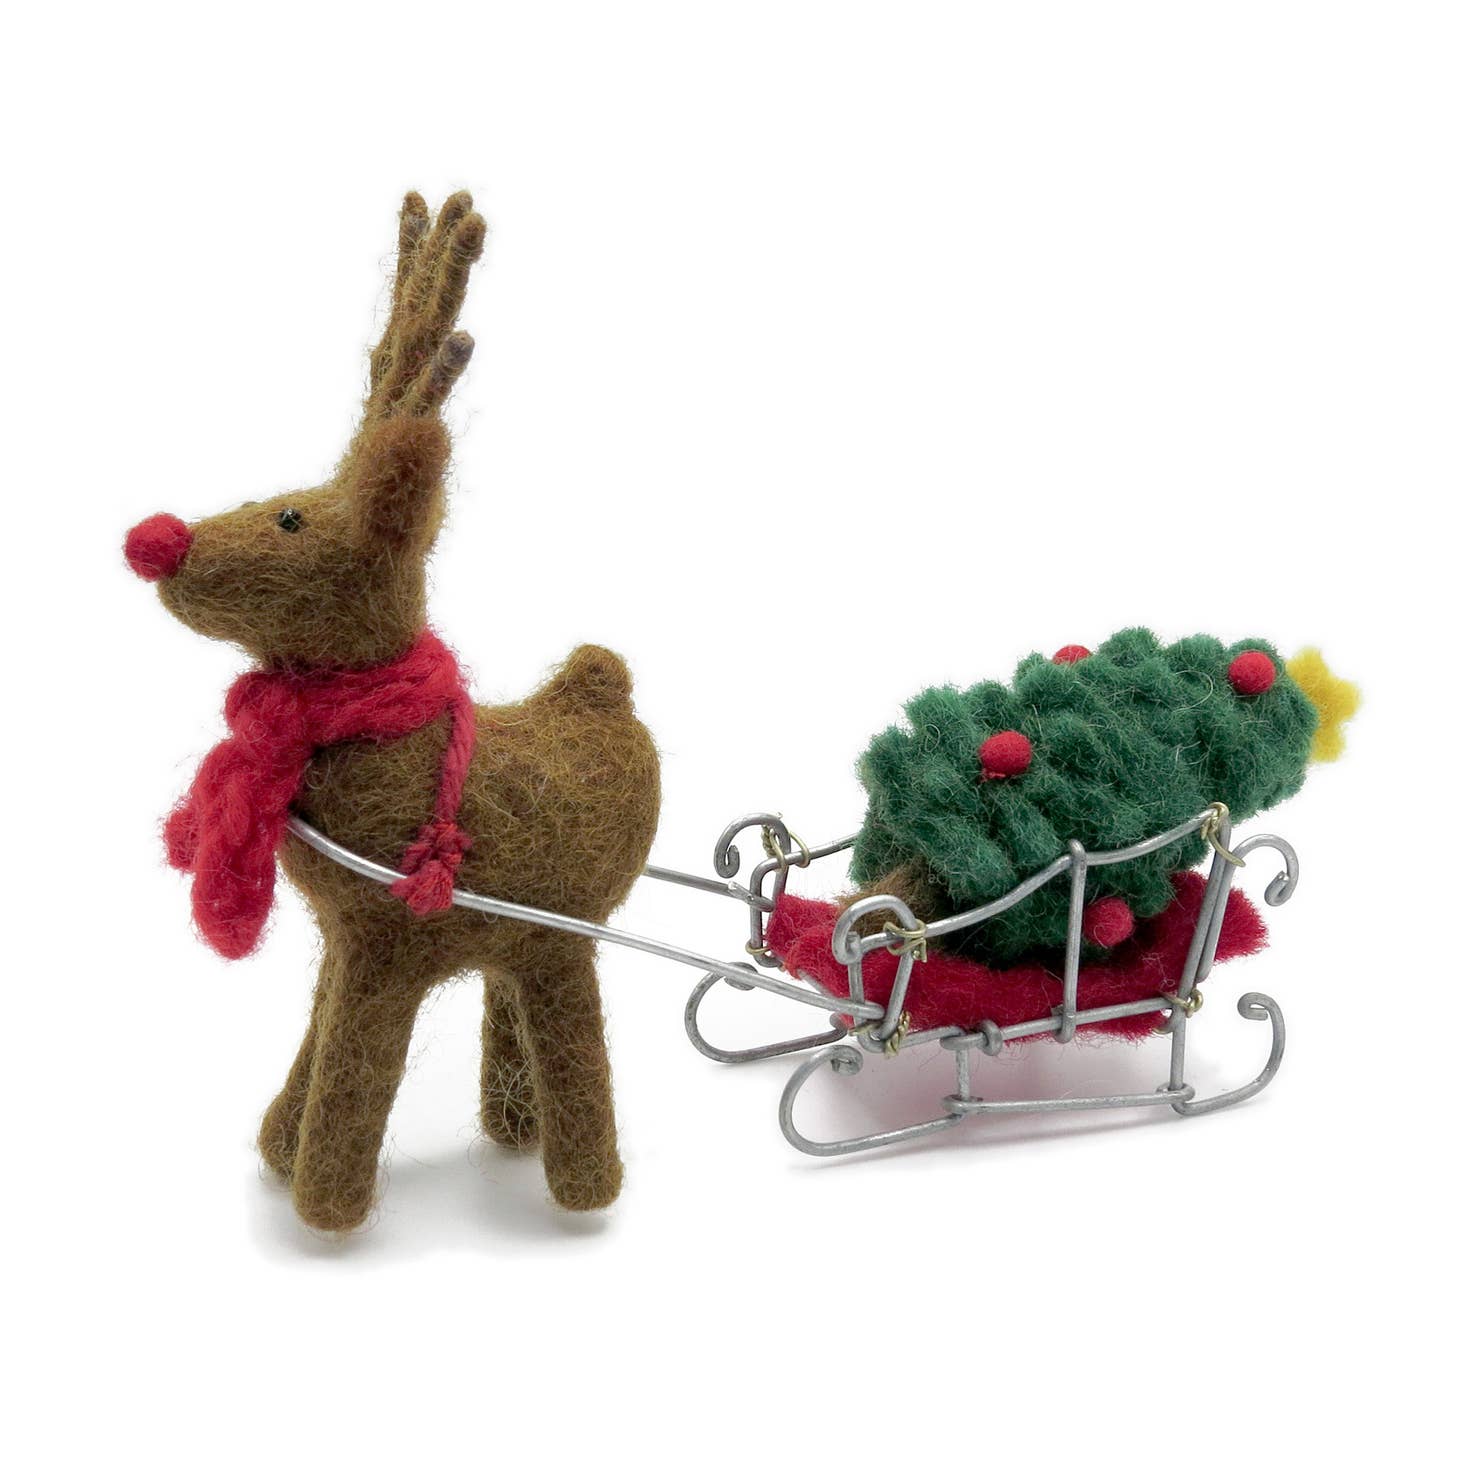 Primitive Folk Art Handmade Felted Wool Christmas Reindeer w/ Sleigh and Tree - The Primitive Pineapple Collection